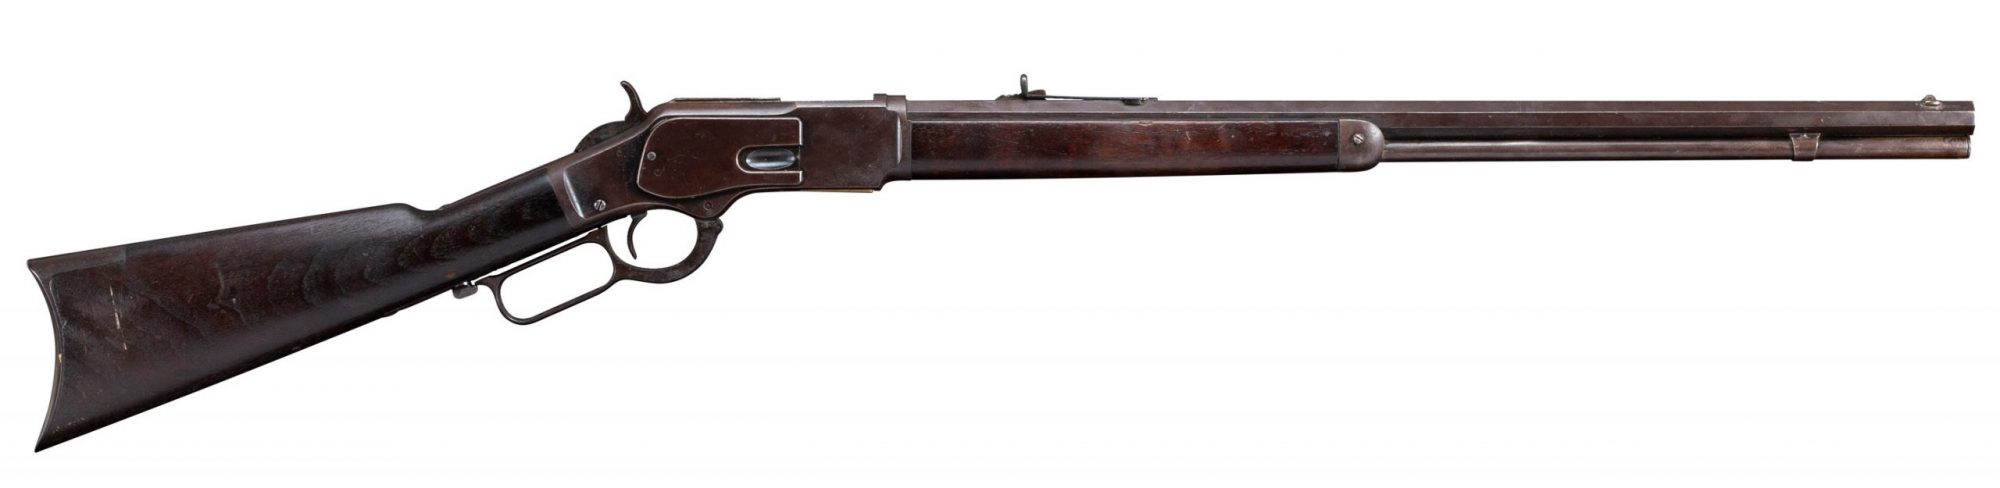 Photo of a Winchester Model 1873 from 1905, before restoration by Turnbull Restoration of Bloomfield, NY